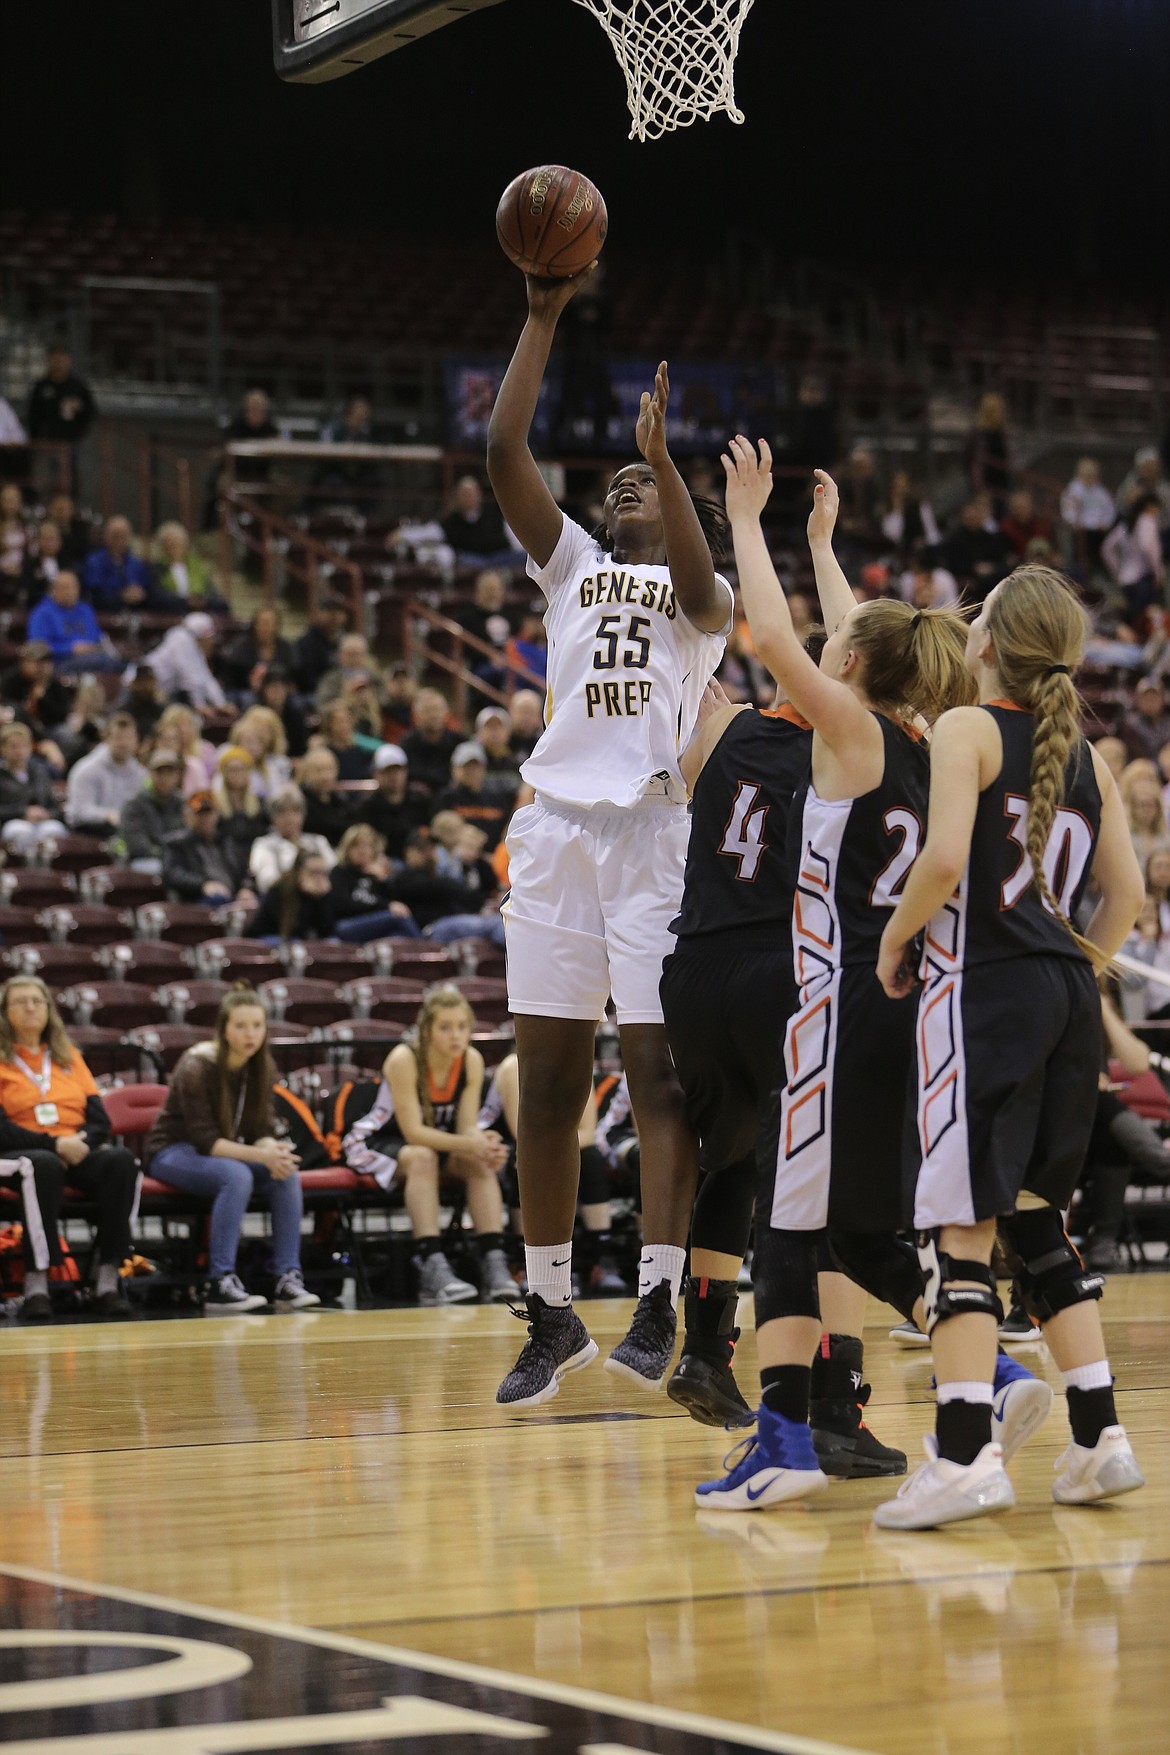 JASON DUCHOW PHOTOGRAPHY
Bella Murekatete of Genesis Prep goes up for a shot against Butte County in the state 1A Division II title game Saturday at the Ford Idaho Center in Nampa.